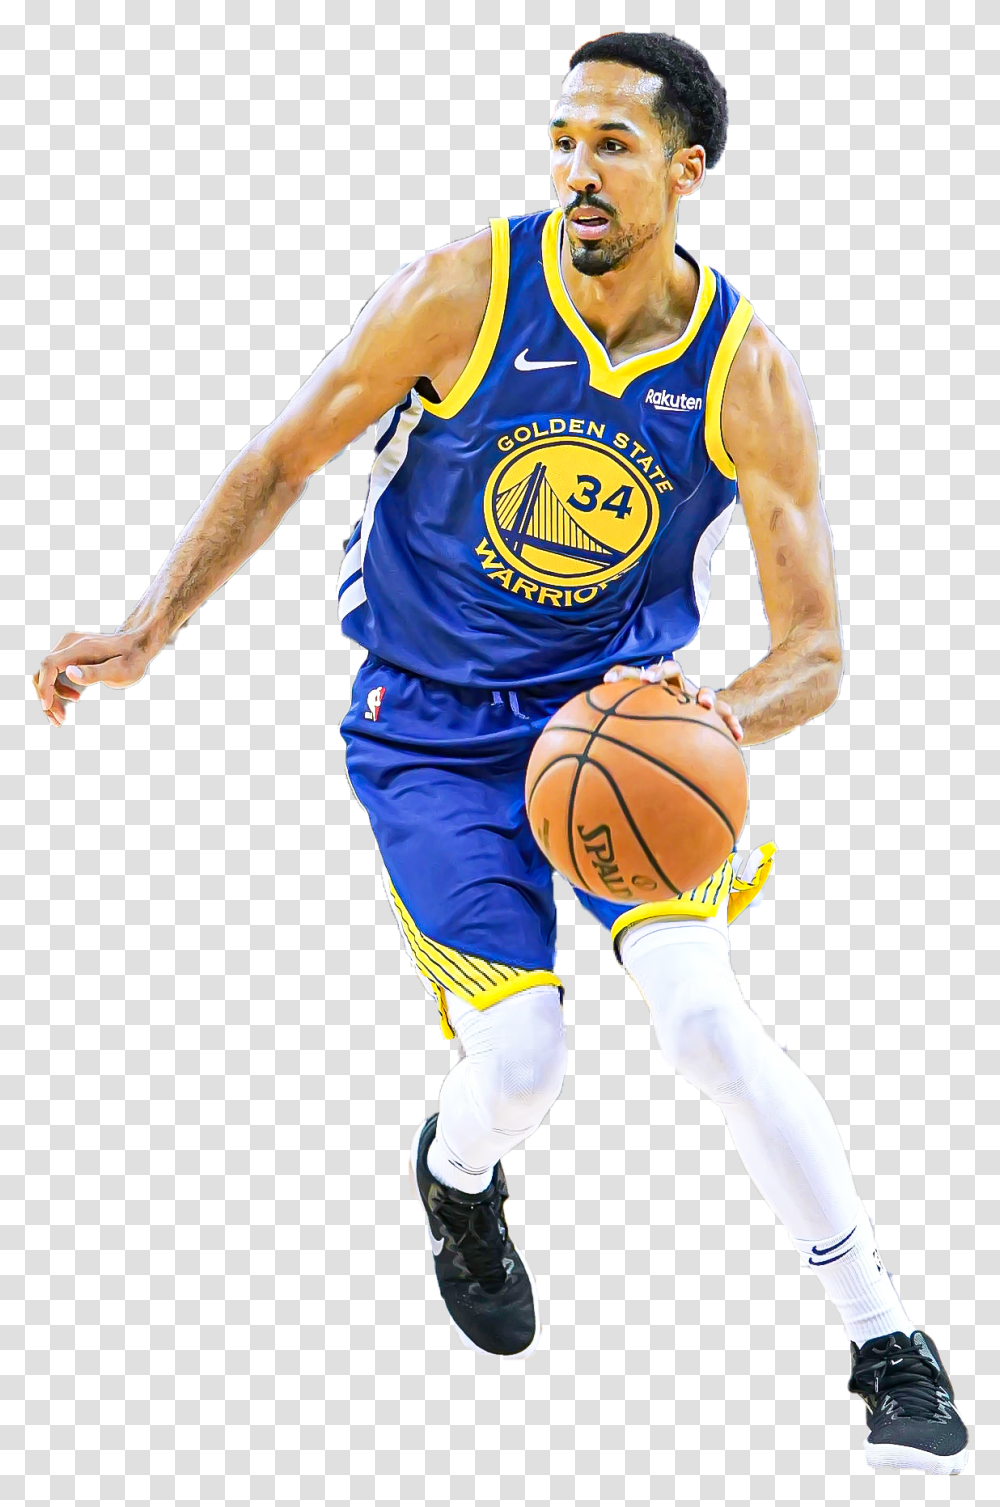 Download Free Images Mart Basketball Player, Person, Human, People, Team Sport Transparent Png